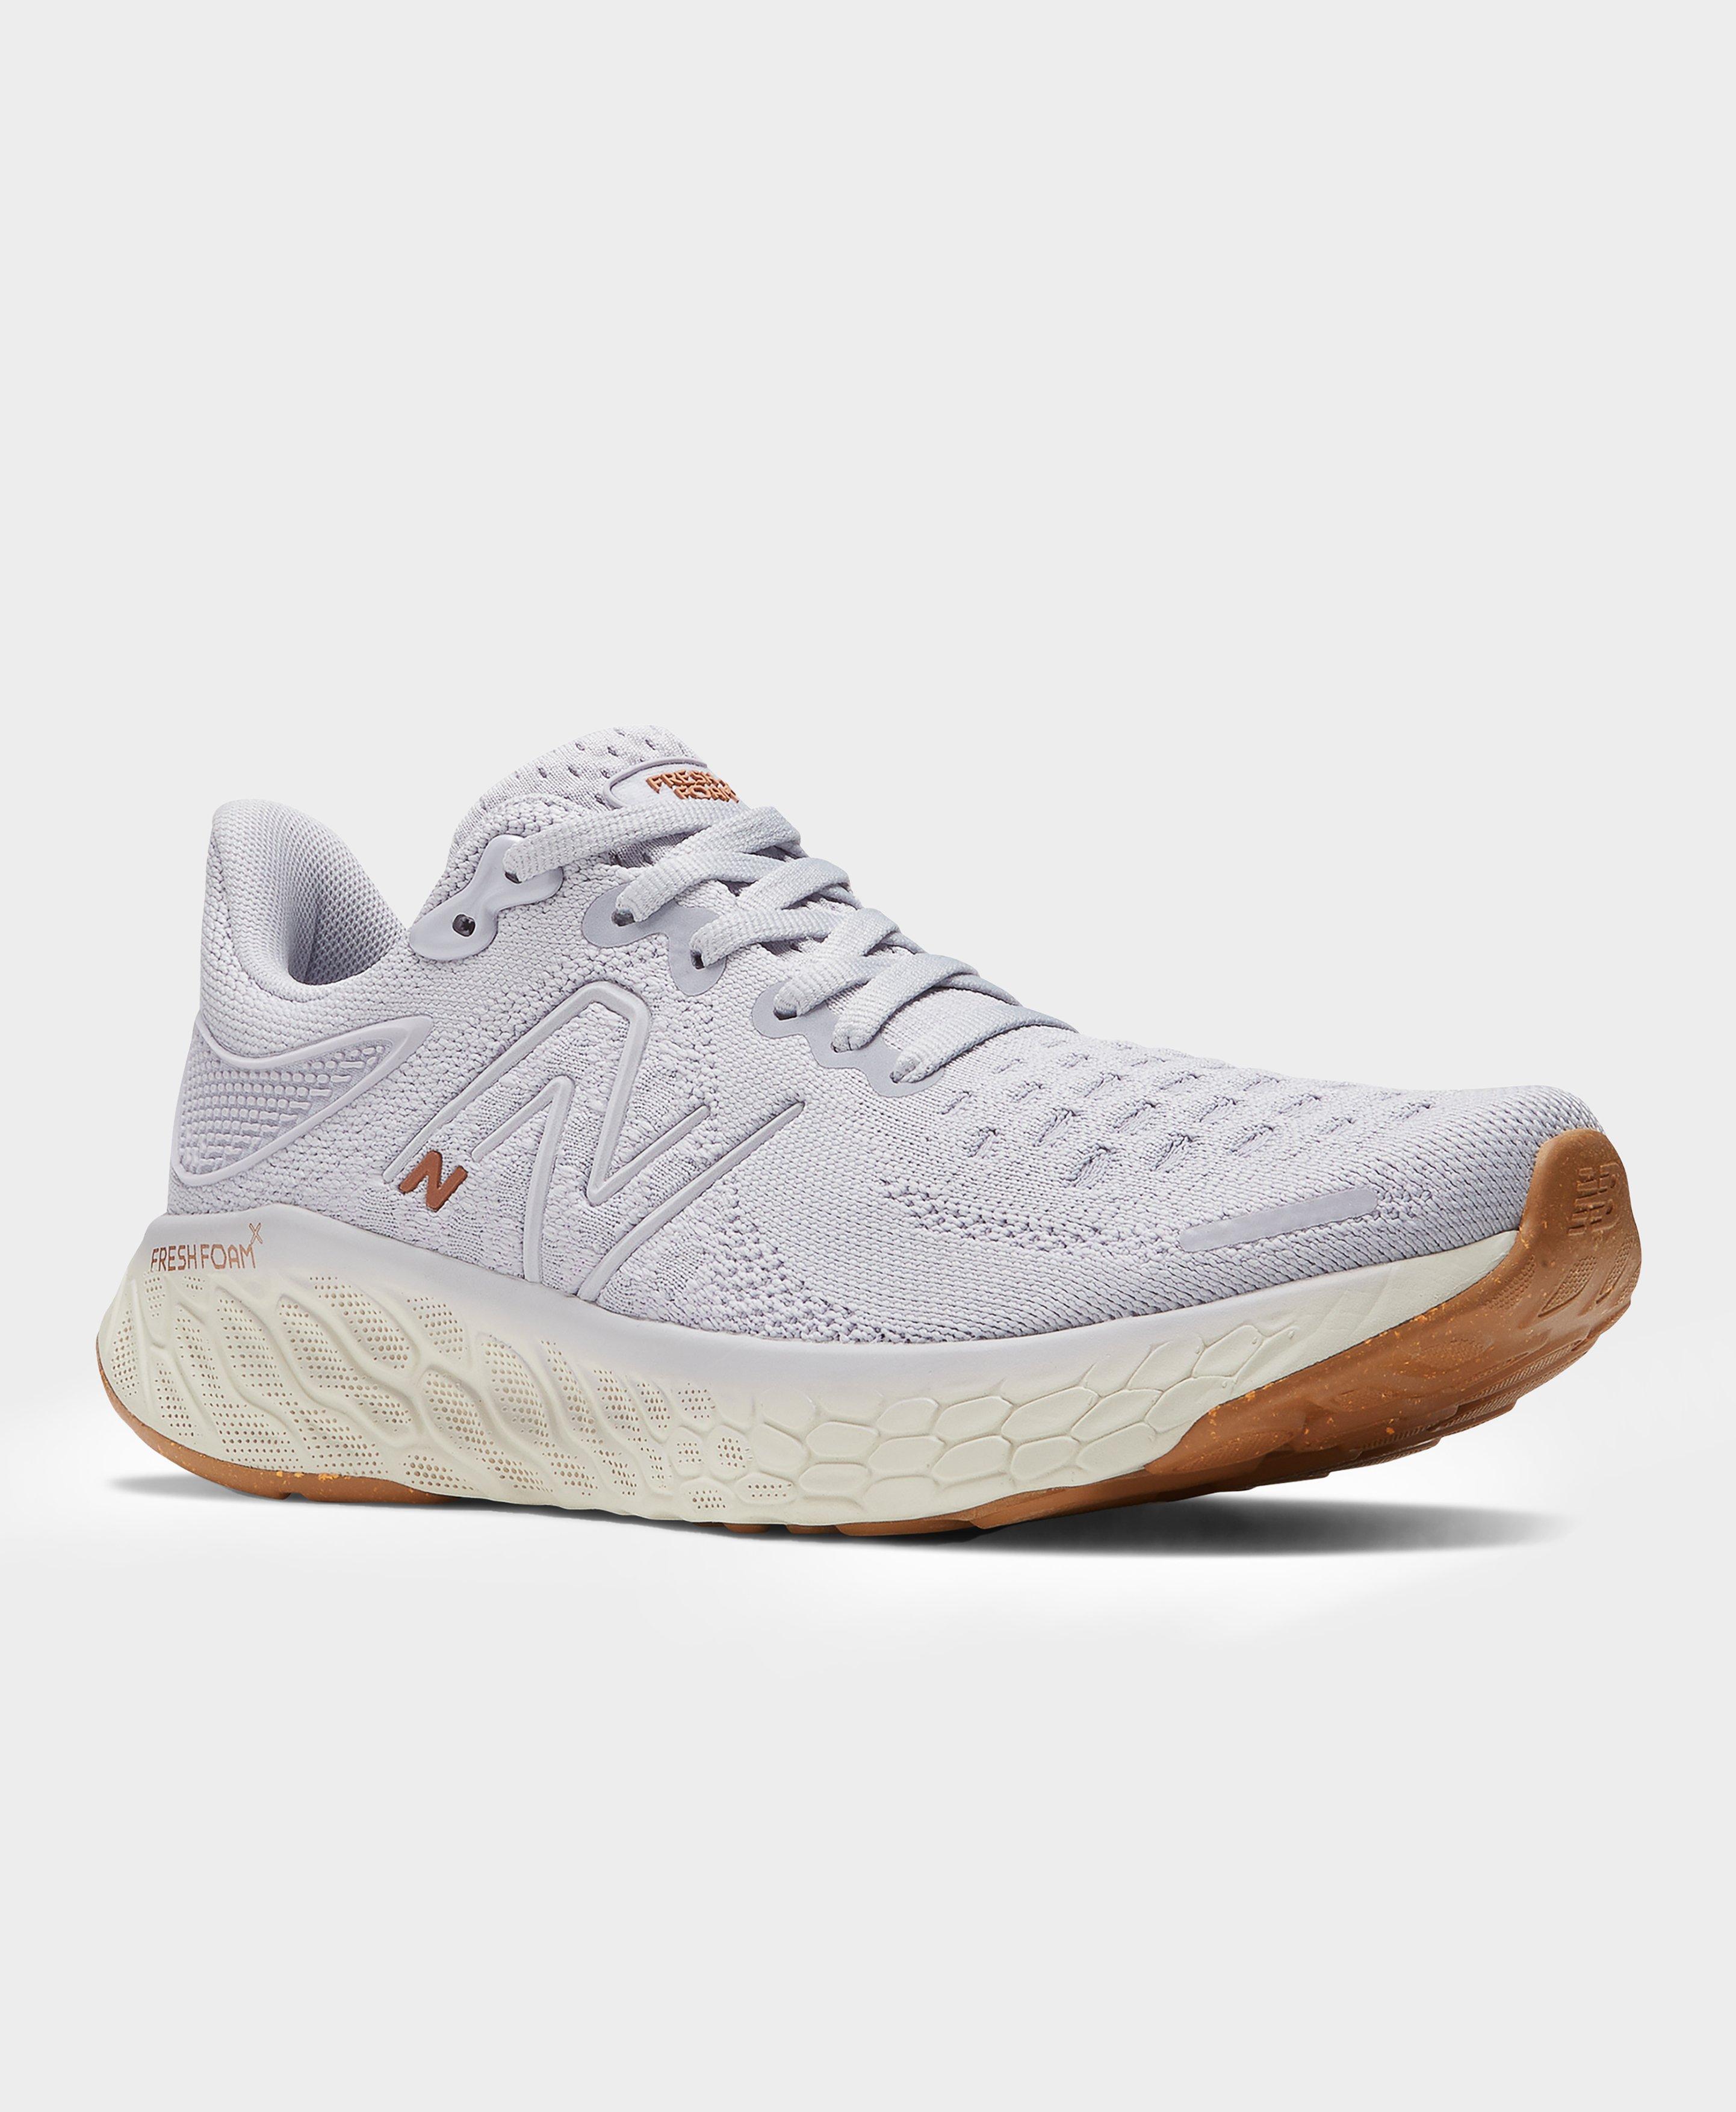 New Balance 1080 V12 Sneakers- libra | Women's Trainers + Boots |